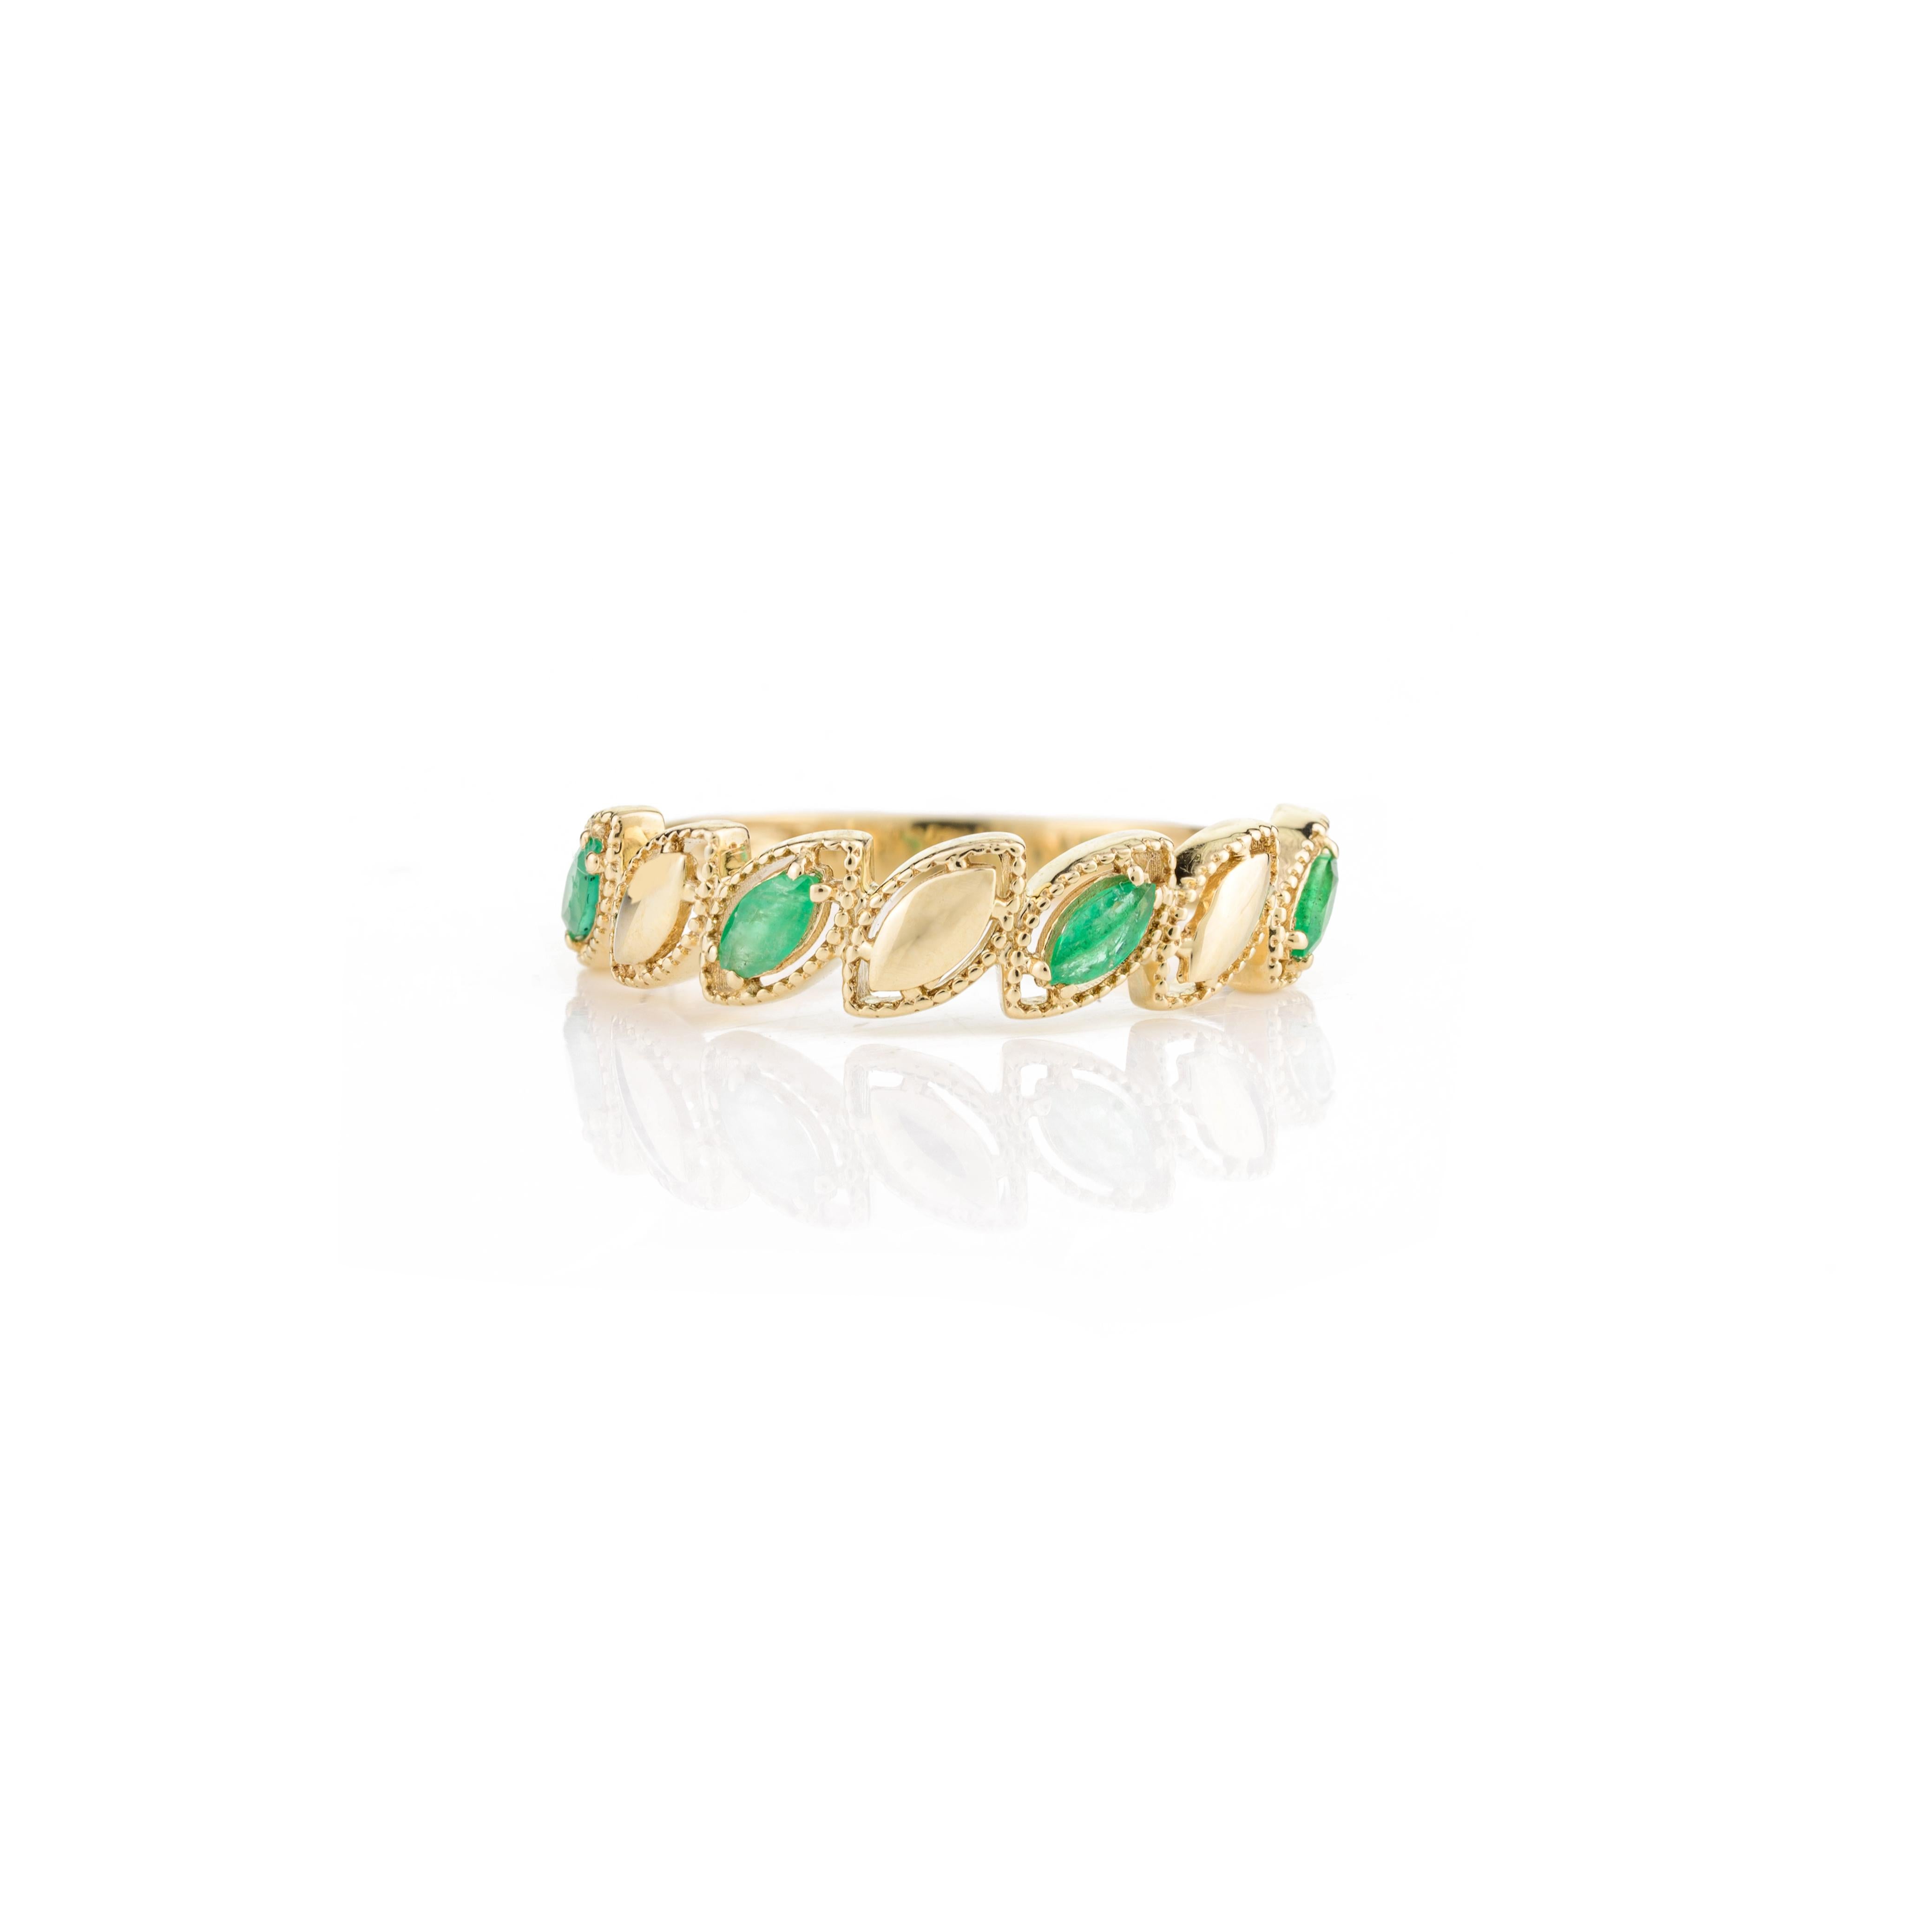 For Sale:  Delicate Emerald Birthstone Band Ring for Her in 14k Solid Yellow Gold 5